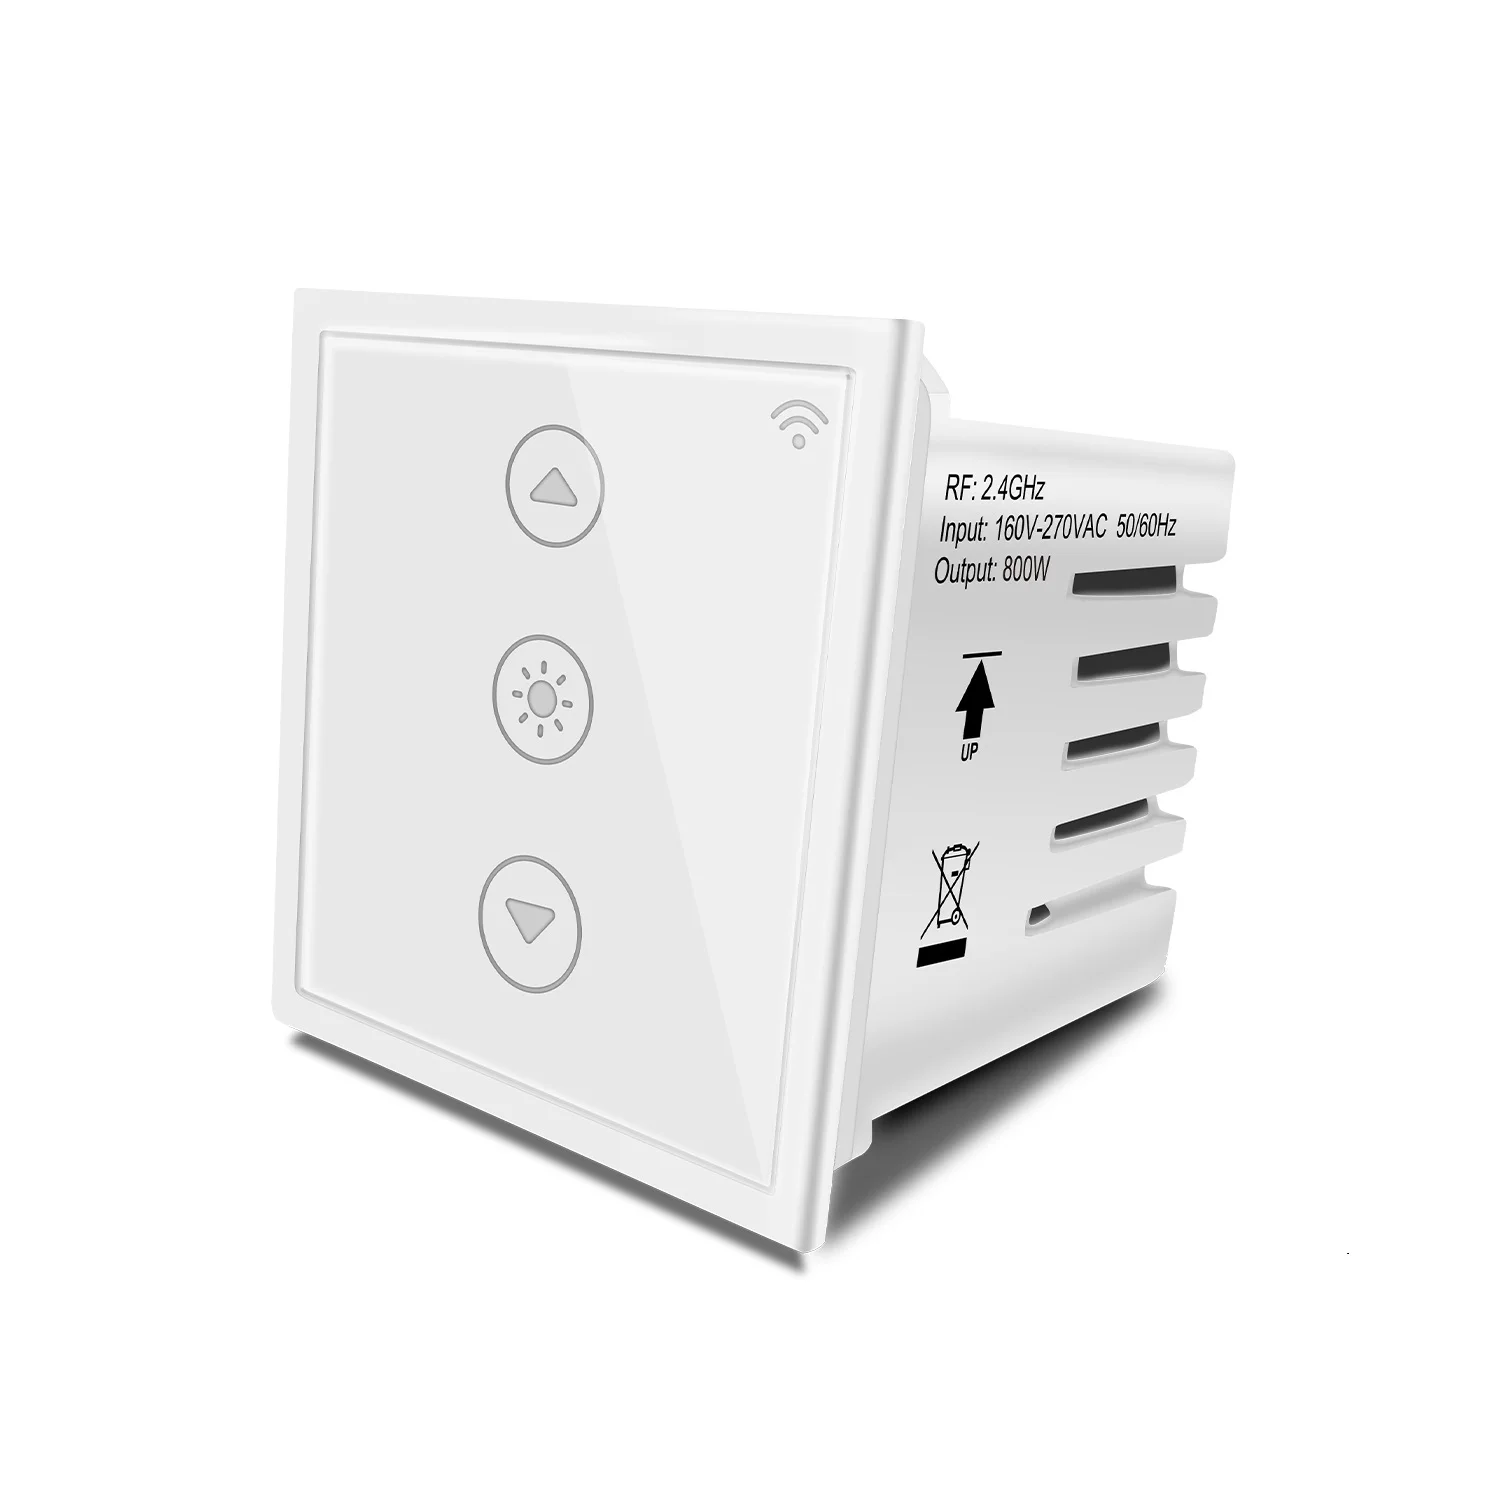 WF510D Tuya App One Way Smart Dimmer Switch For Led Lights Wifi Touch Screen Wall Light Switch Module For Home Automation